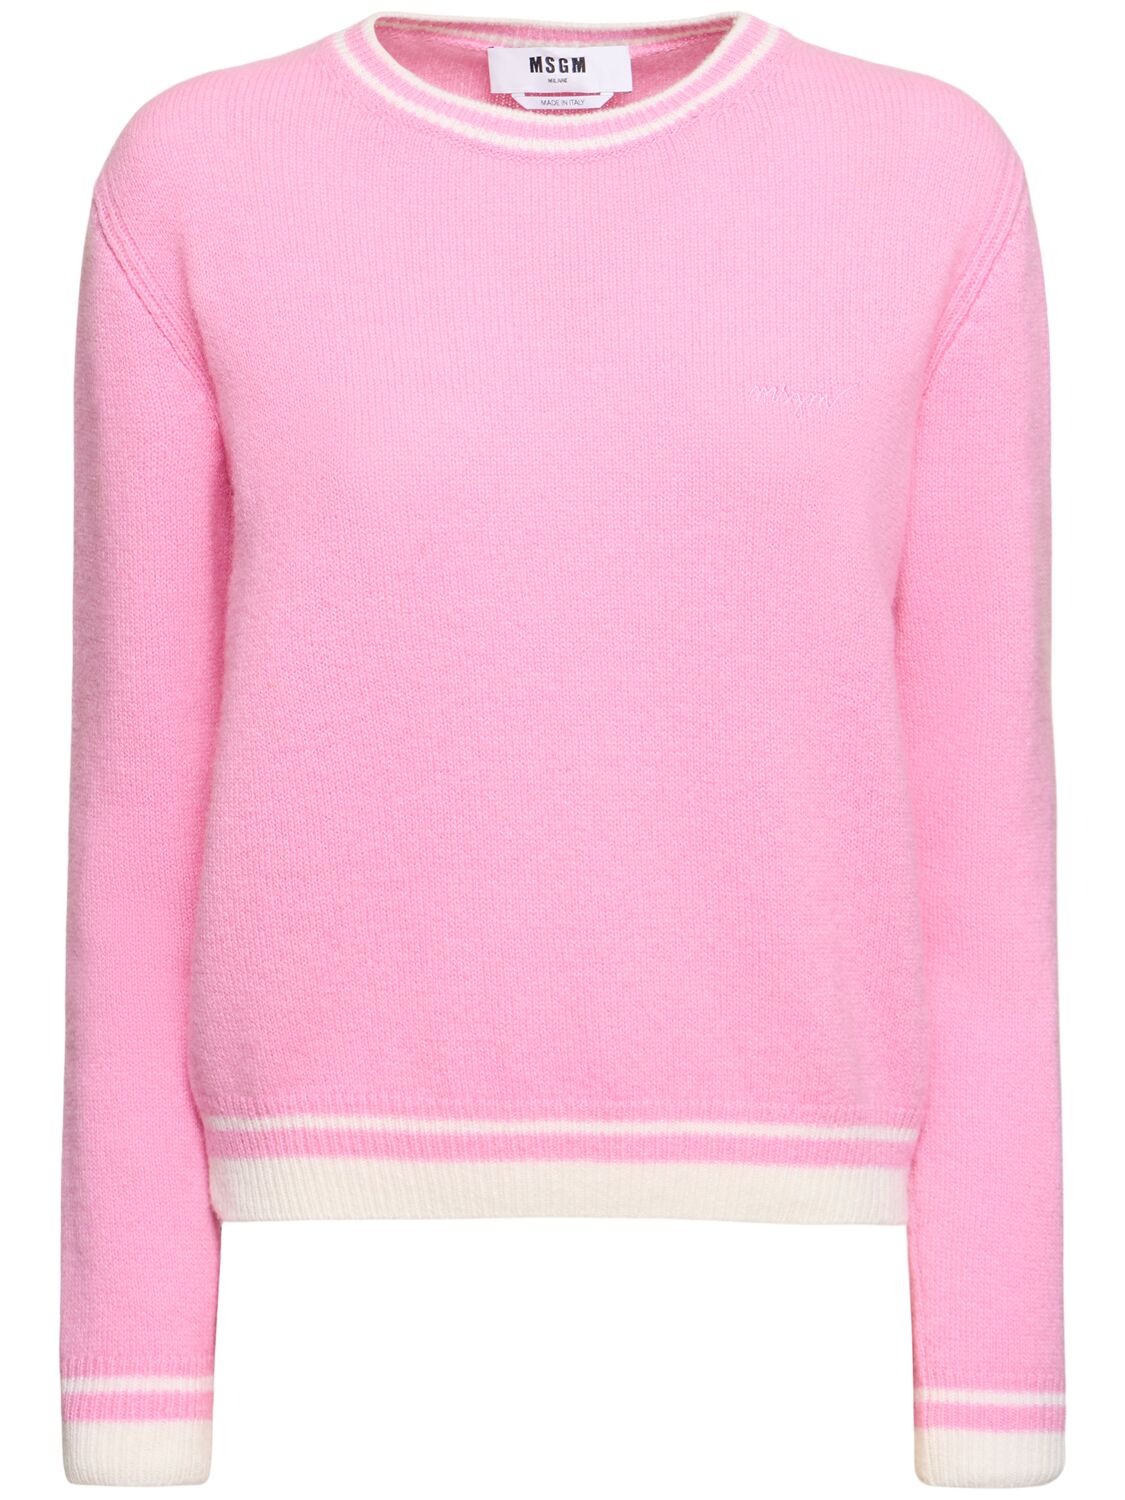 Msgm Wool Blend Knit Crewneck Sweater In Pink